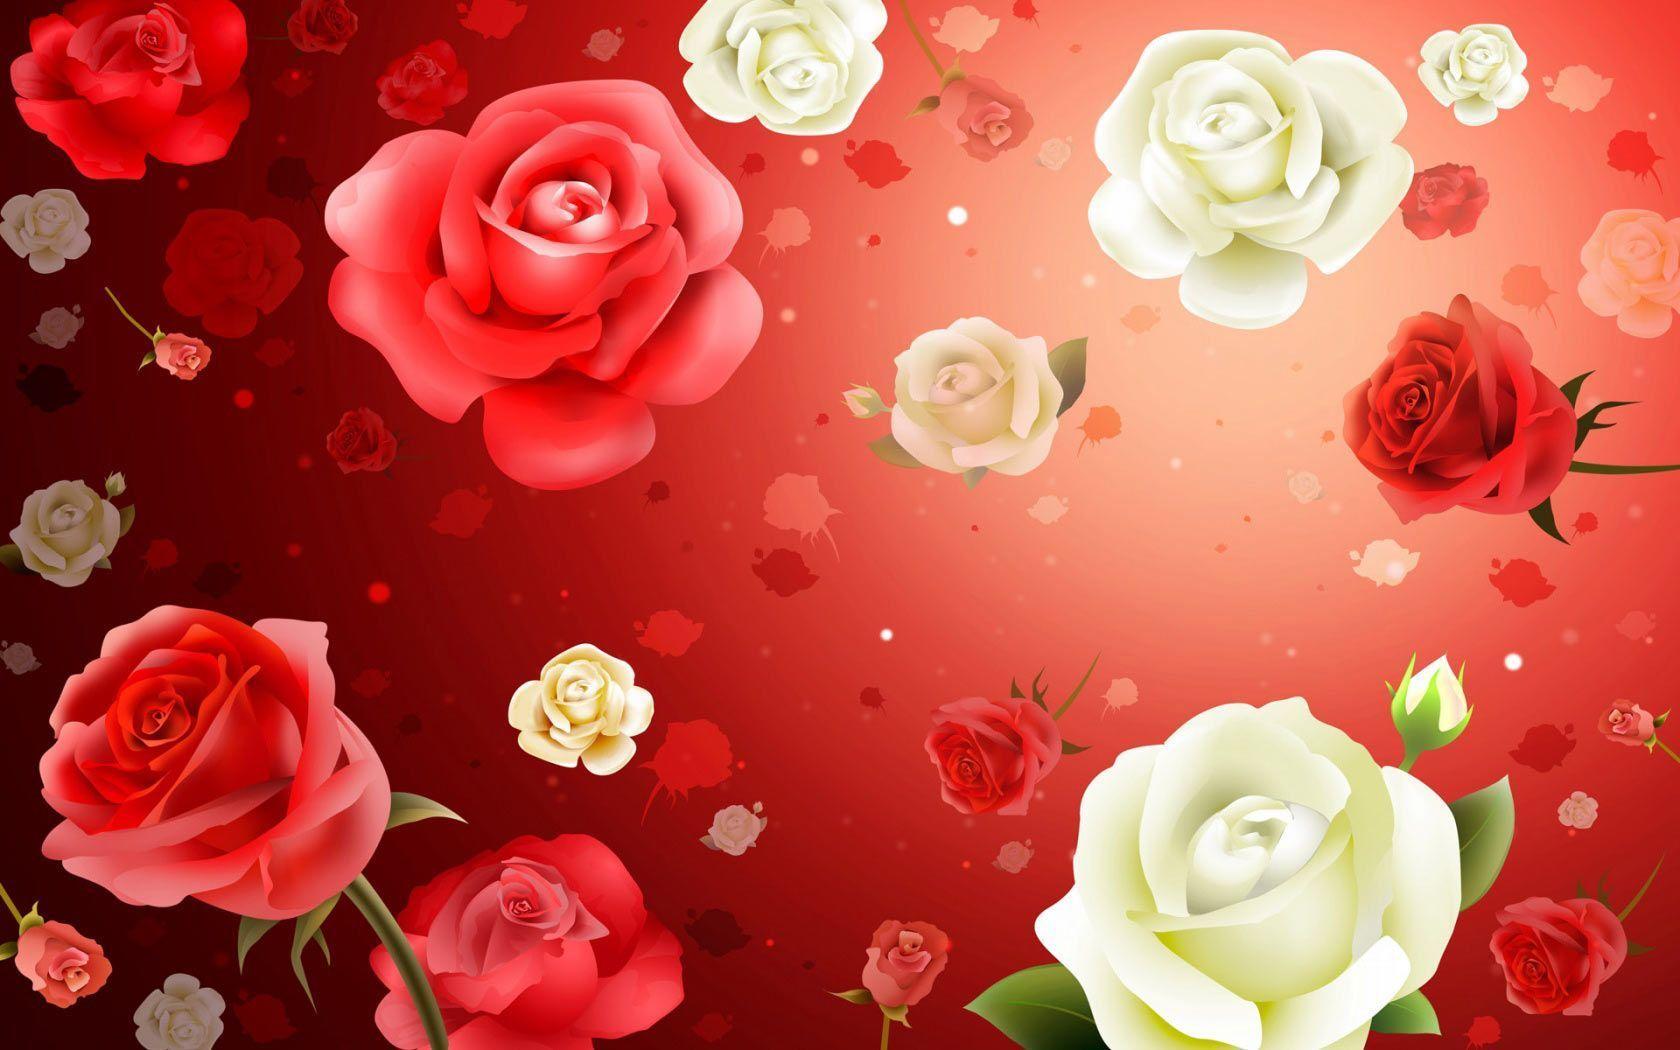 Amazing Flower Background Wallpaper Roses Flowers Background